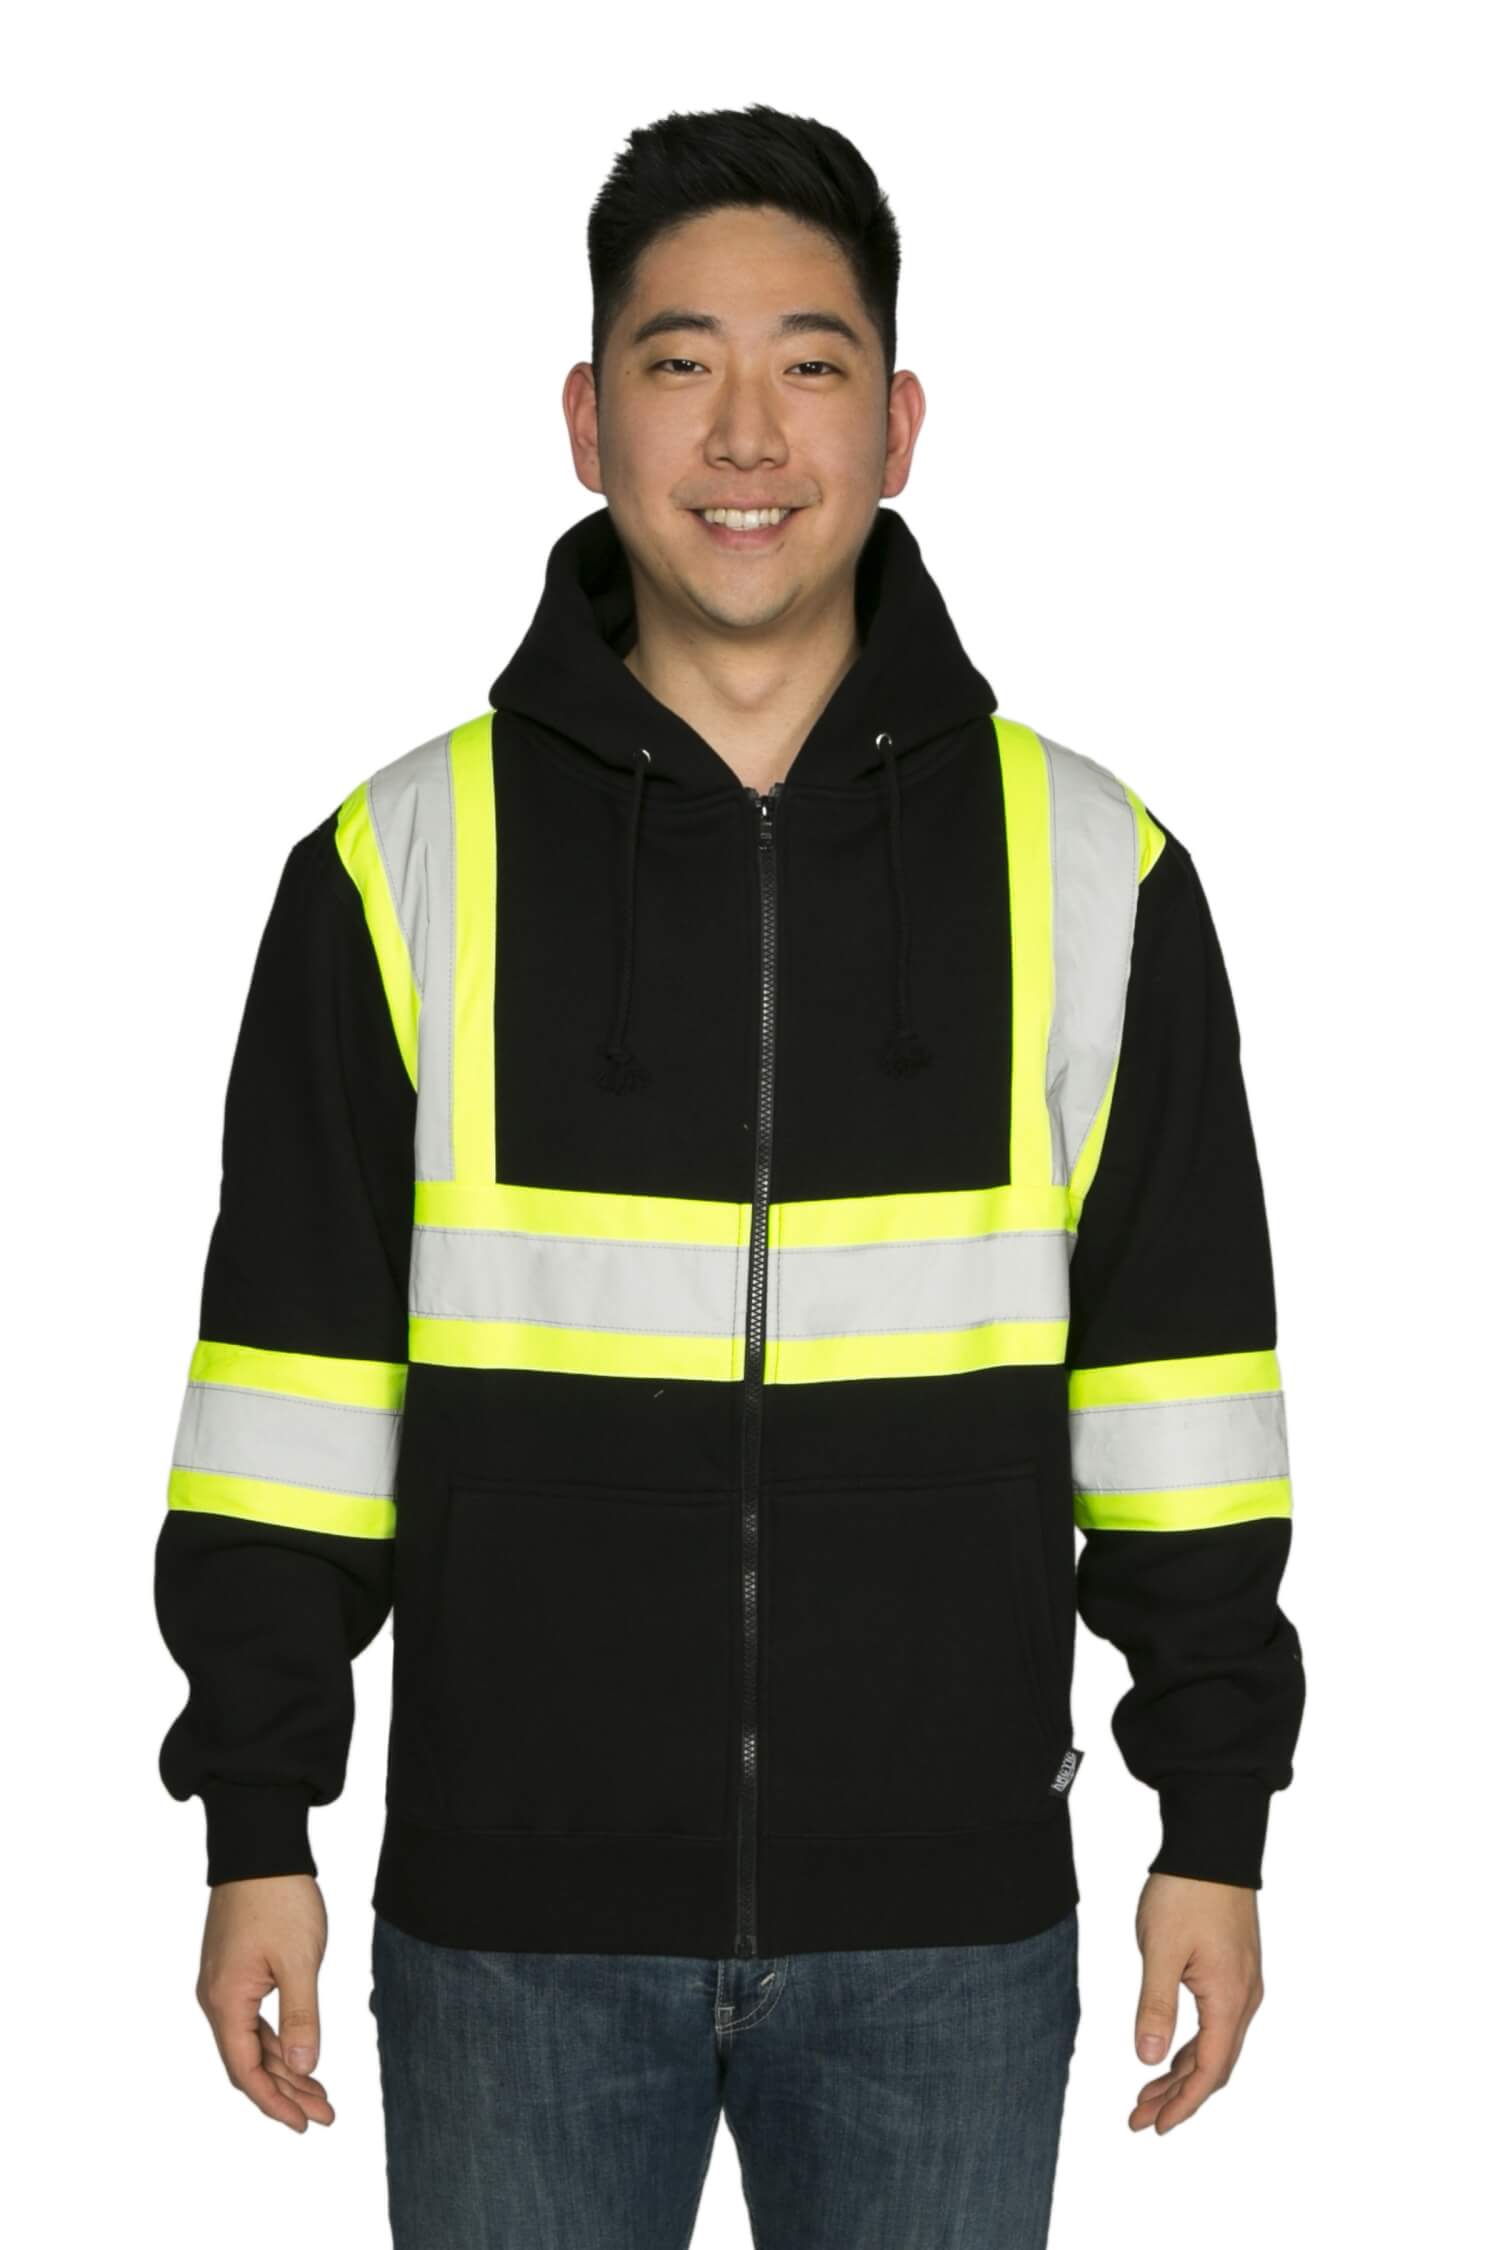 Pants Product categories  Customizable sports and safety wear, Edmonton,  Alberta